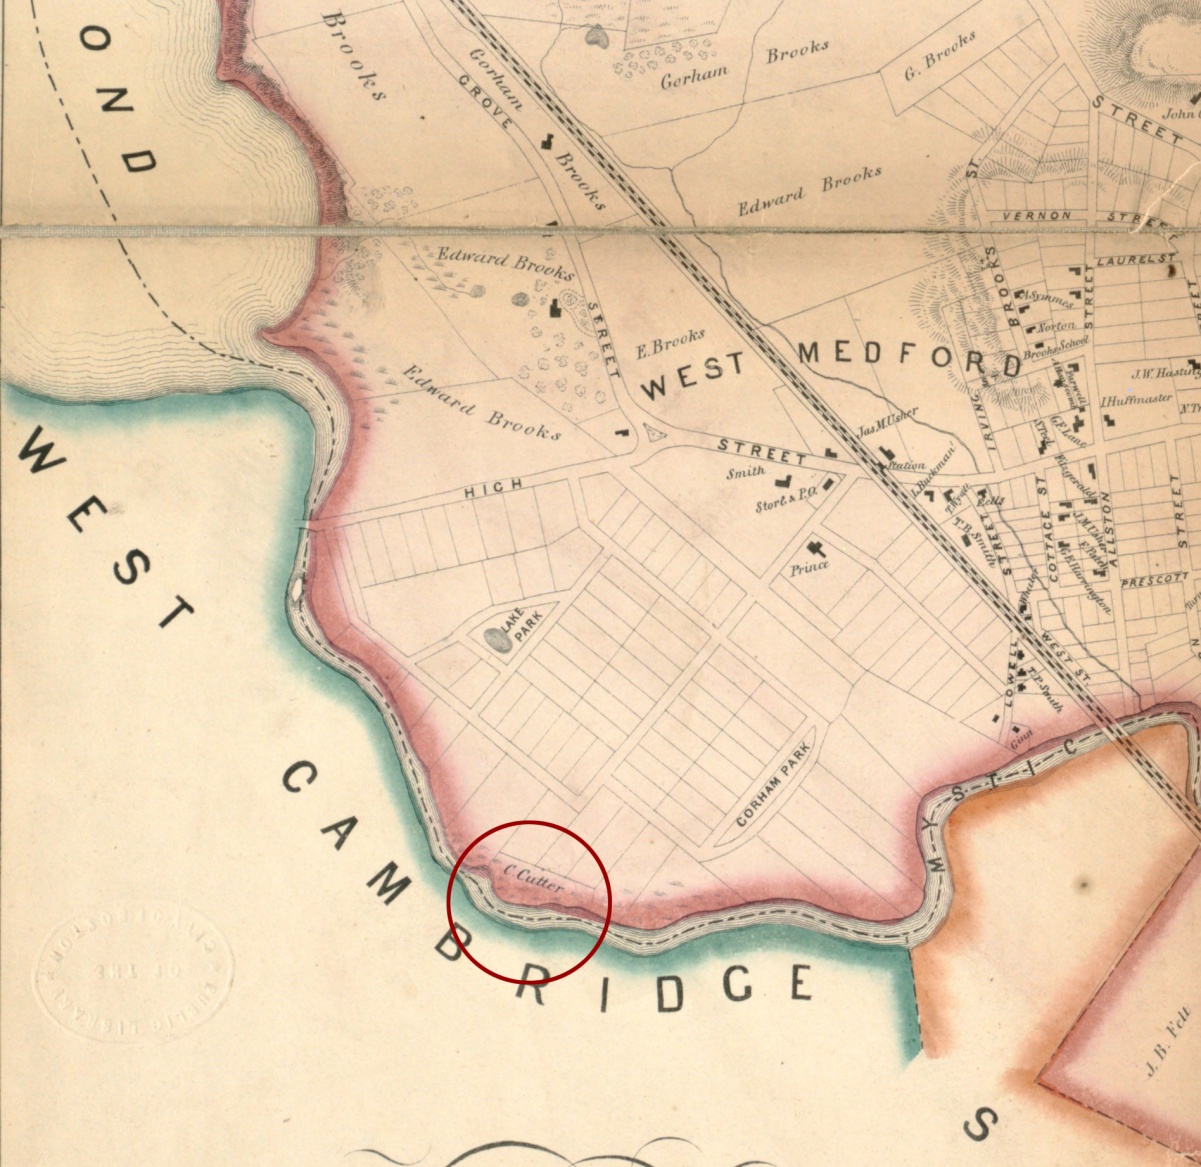 Detail Map of Medford - Walling, Henry Francis. Map of the Town of Medford, Middlesex County, Mass. (1855) - from the Leventhal Map & Education Center, Boston Public Library.